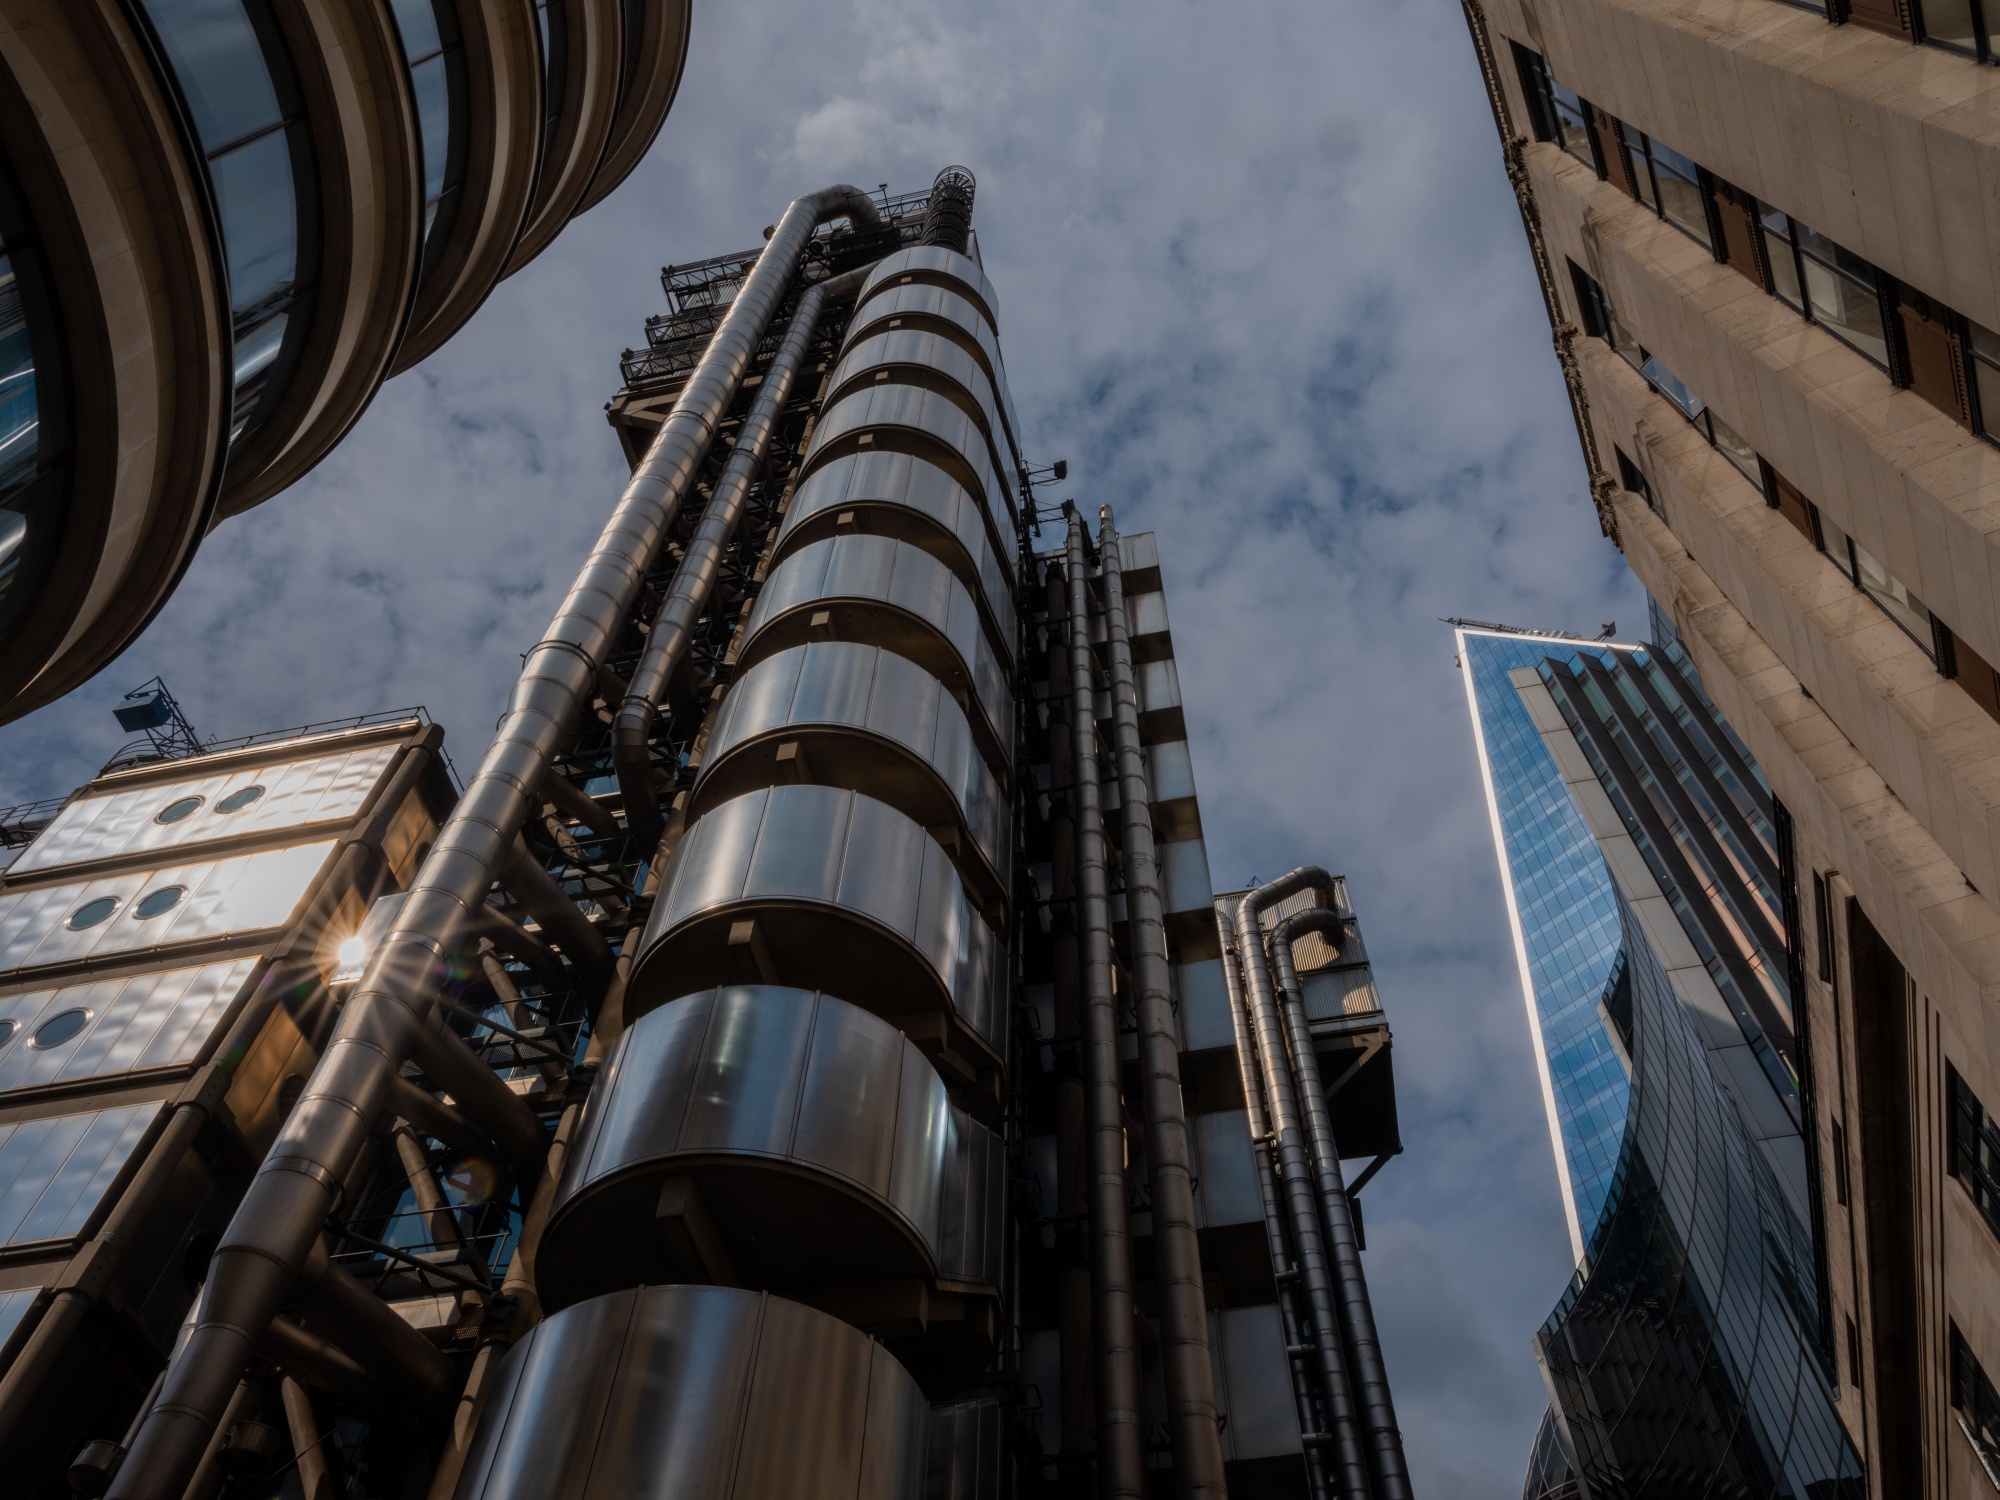 The Lloyds of London building in the City of London.